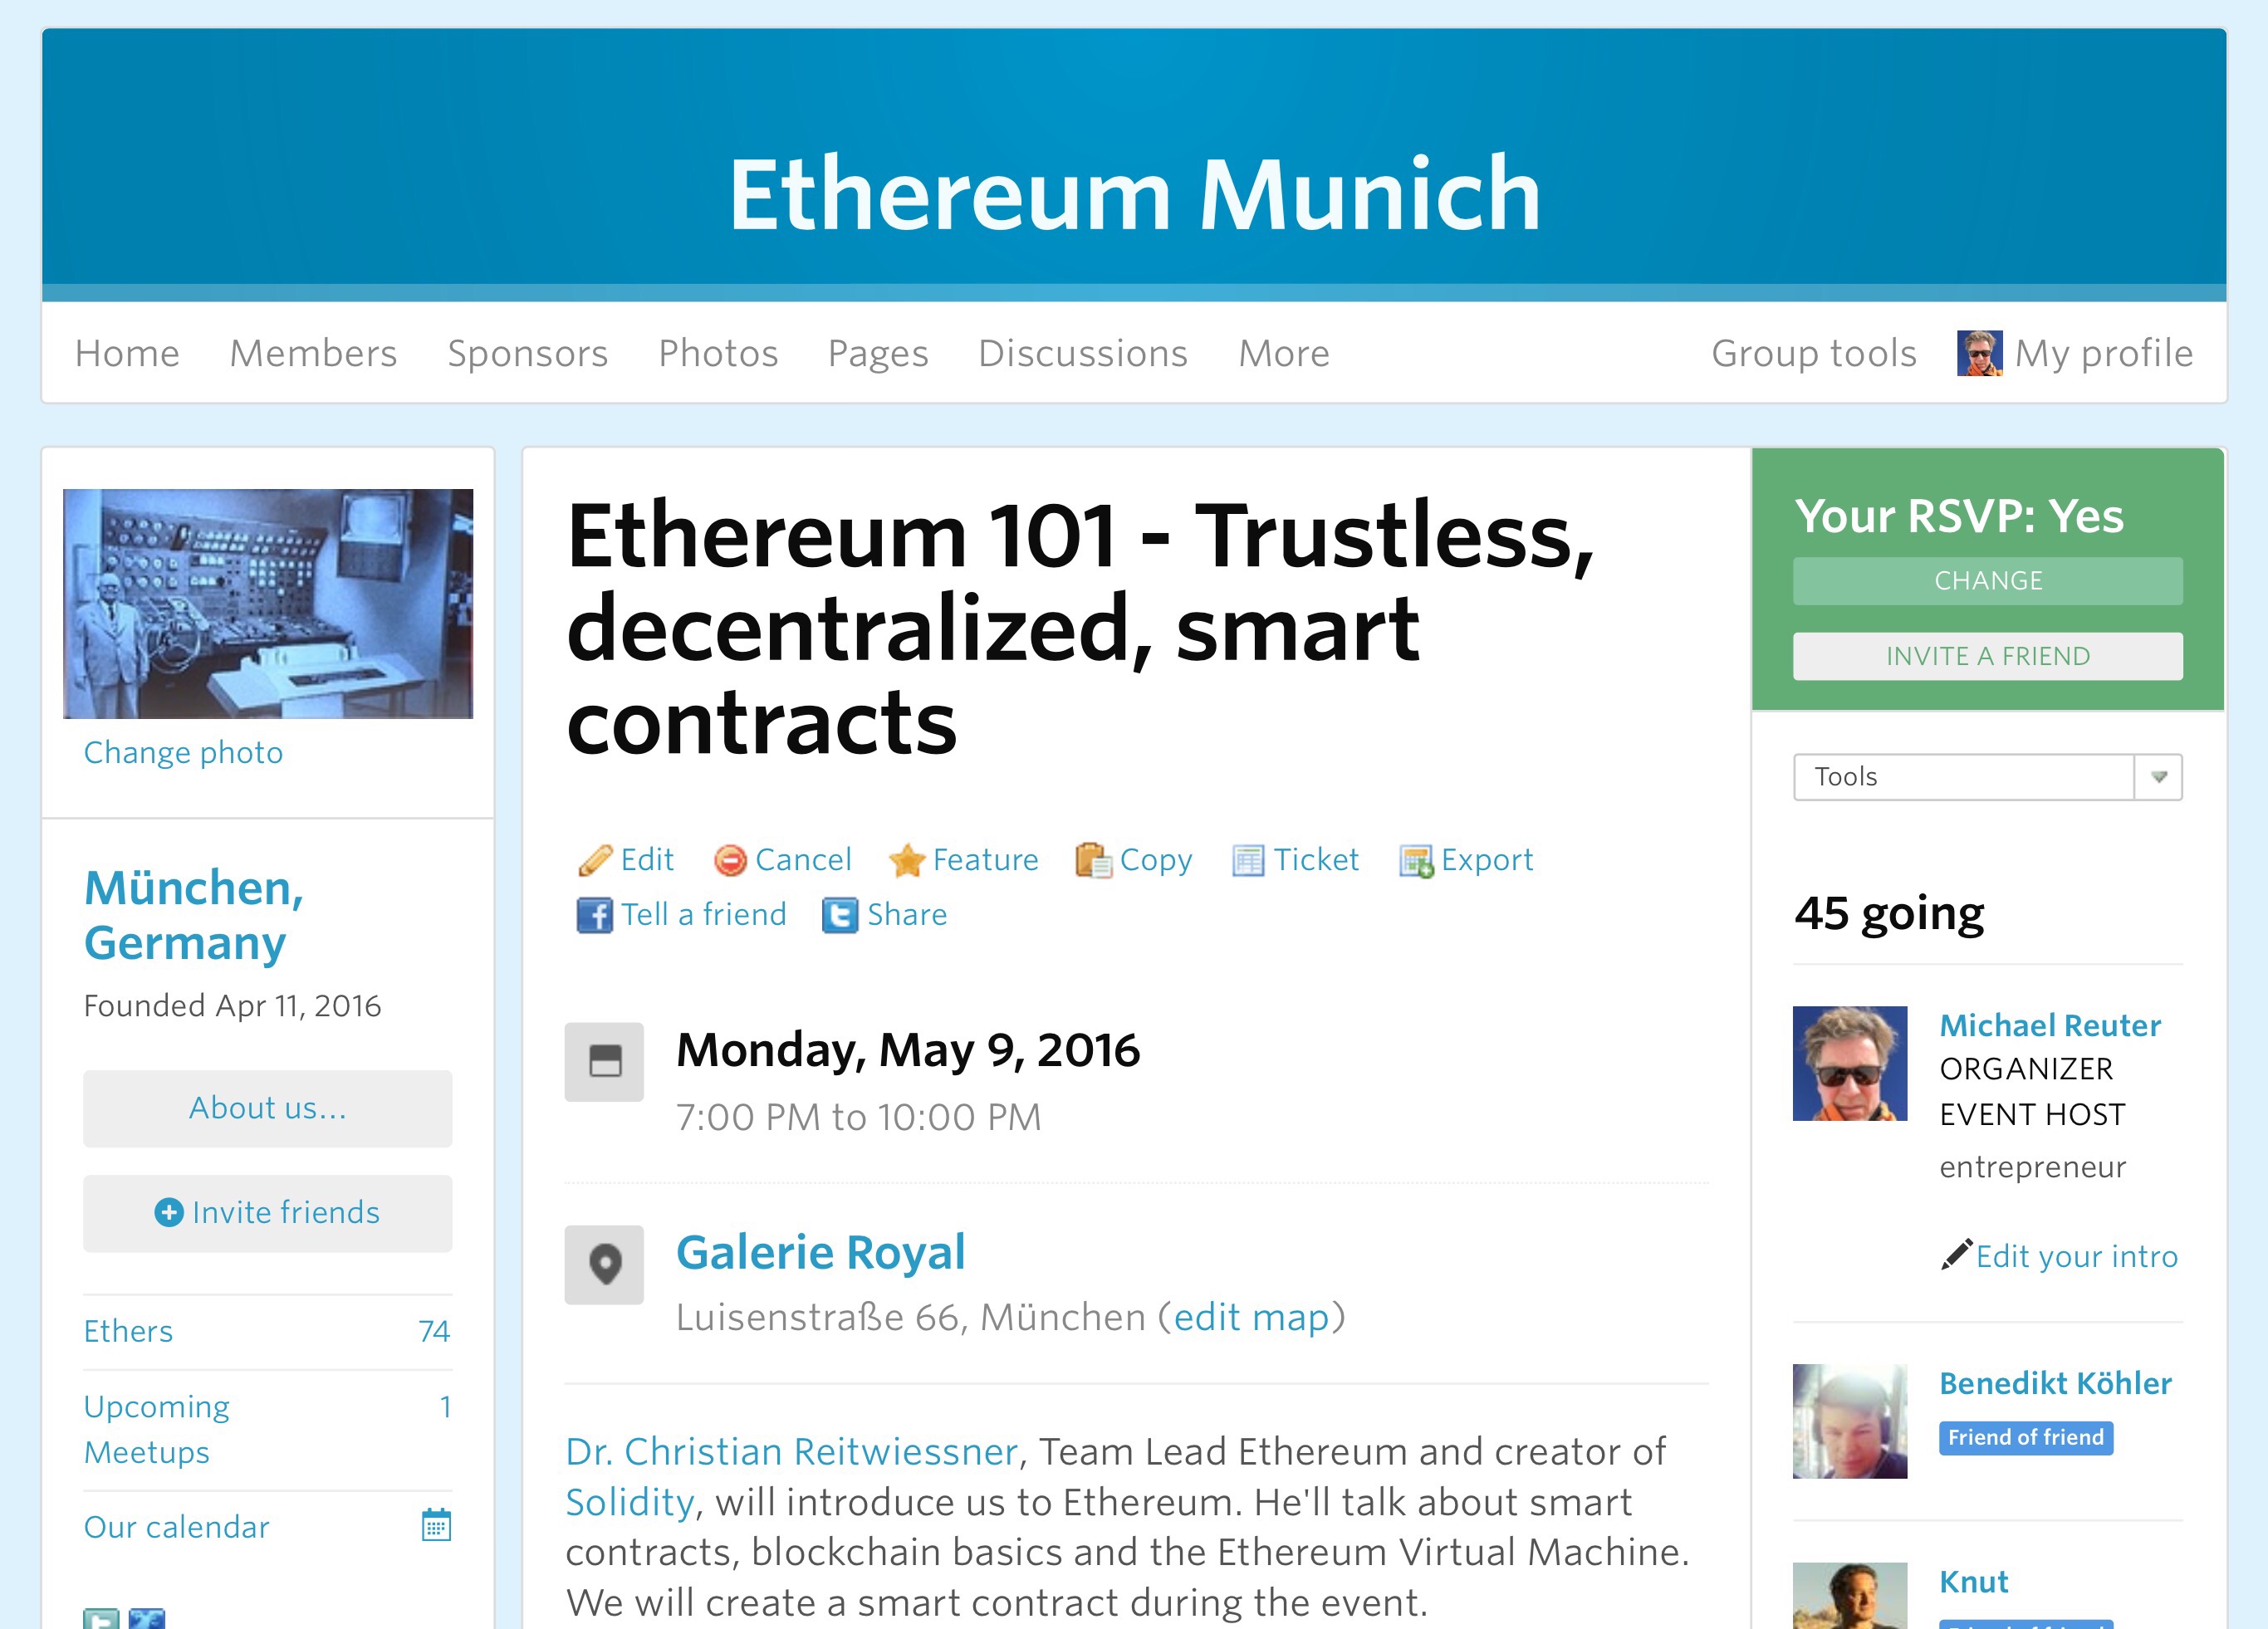 Let's discuss all things Ethereum at our Ethereum Munich ...